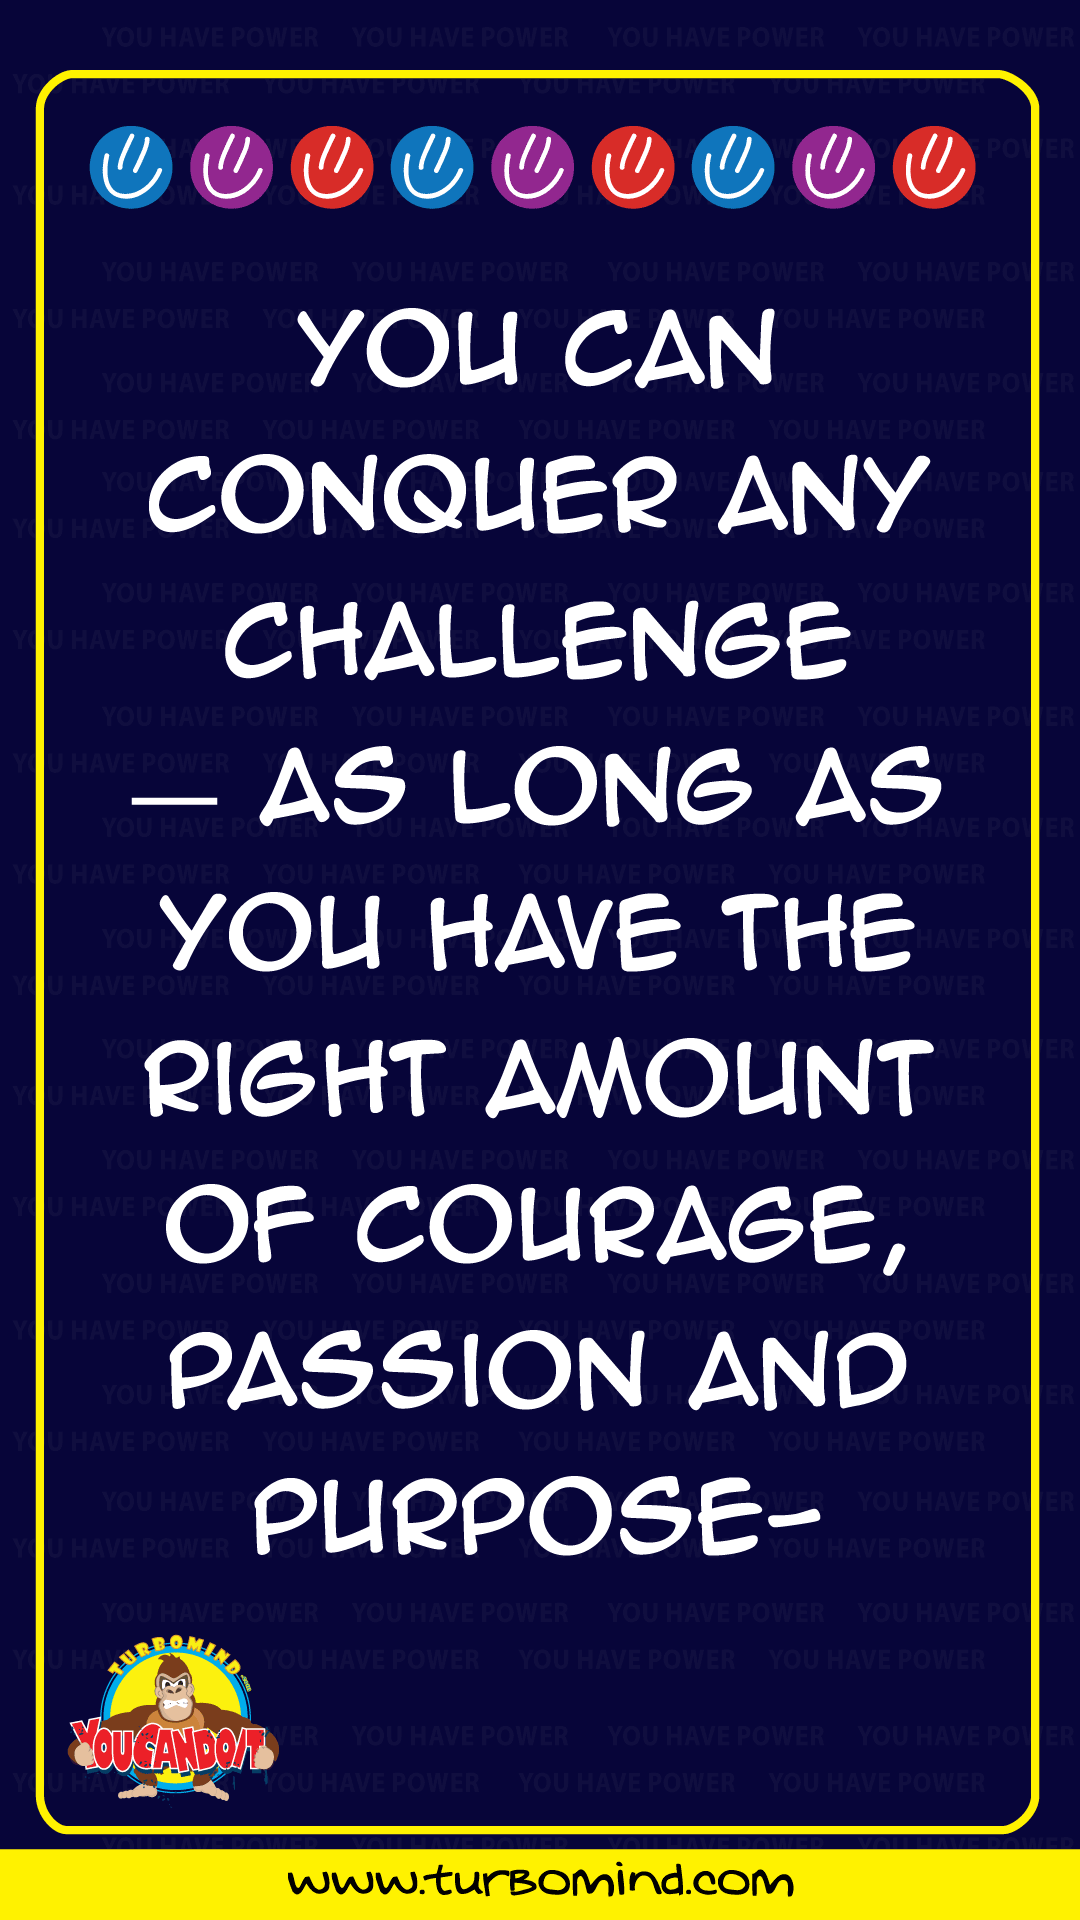 YOU CAN CONQUER ALL CHALLENGES